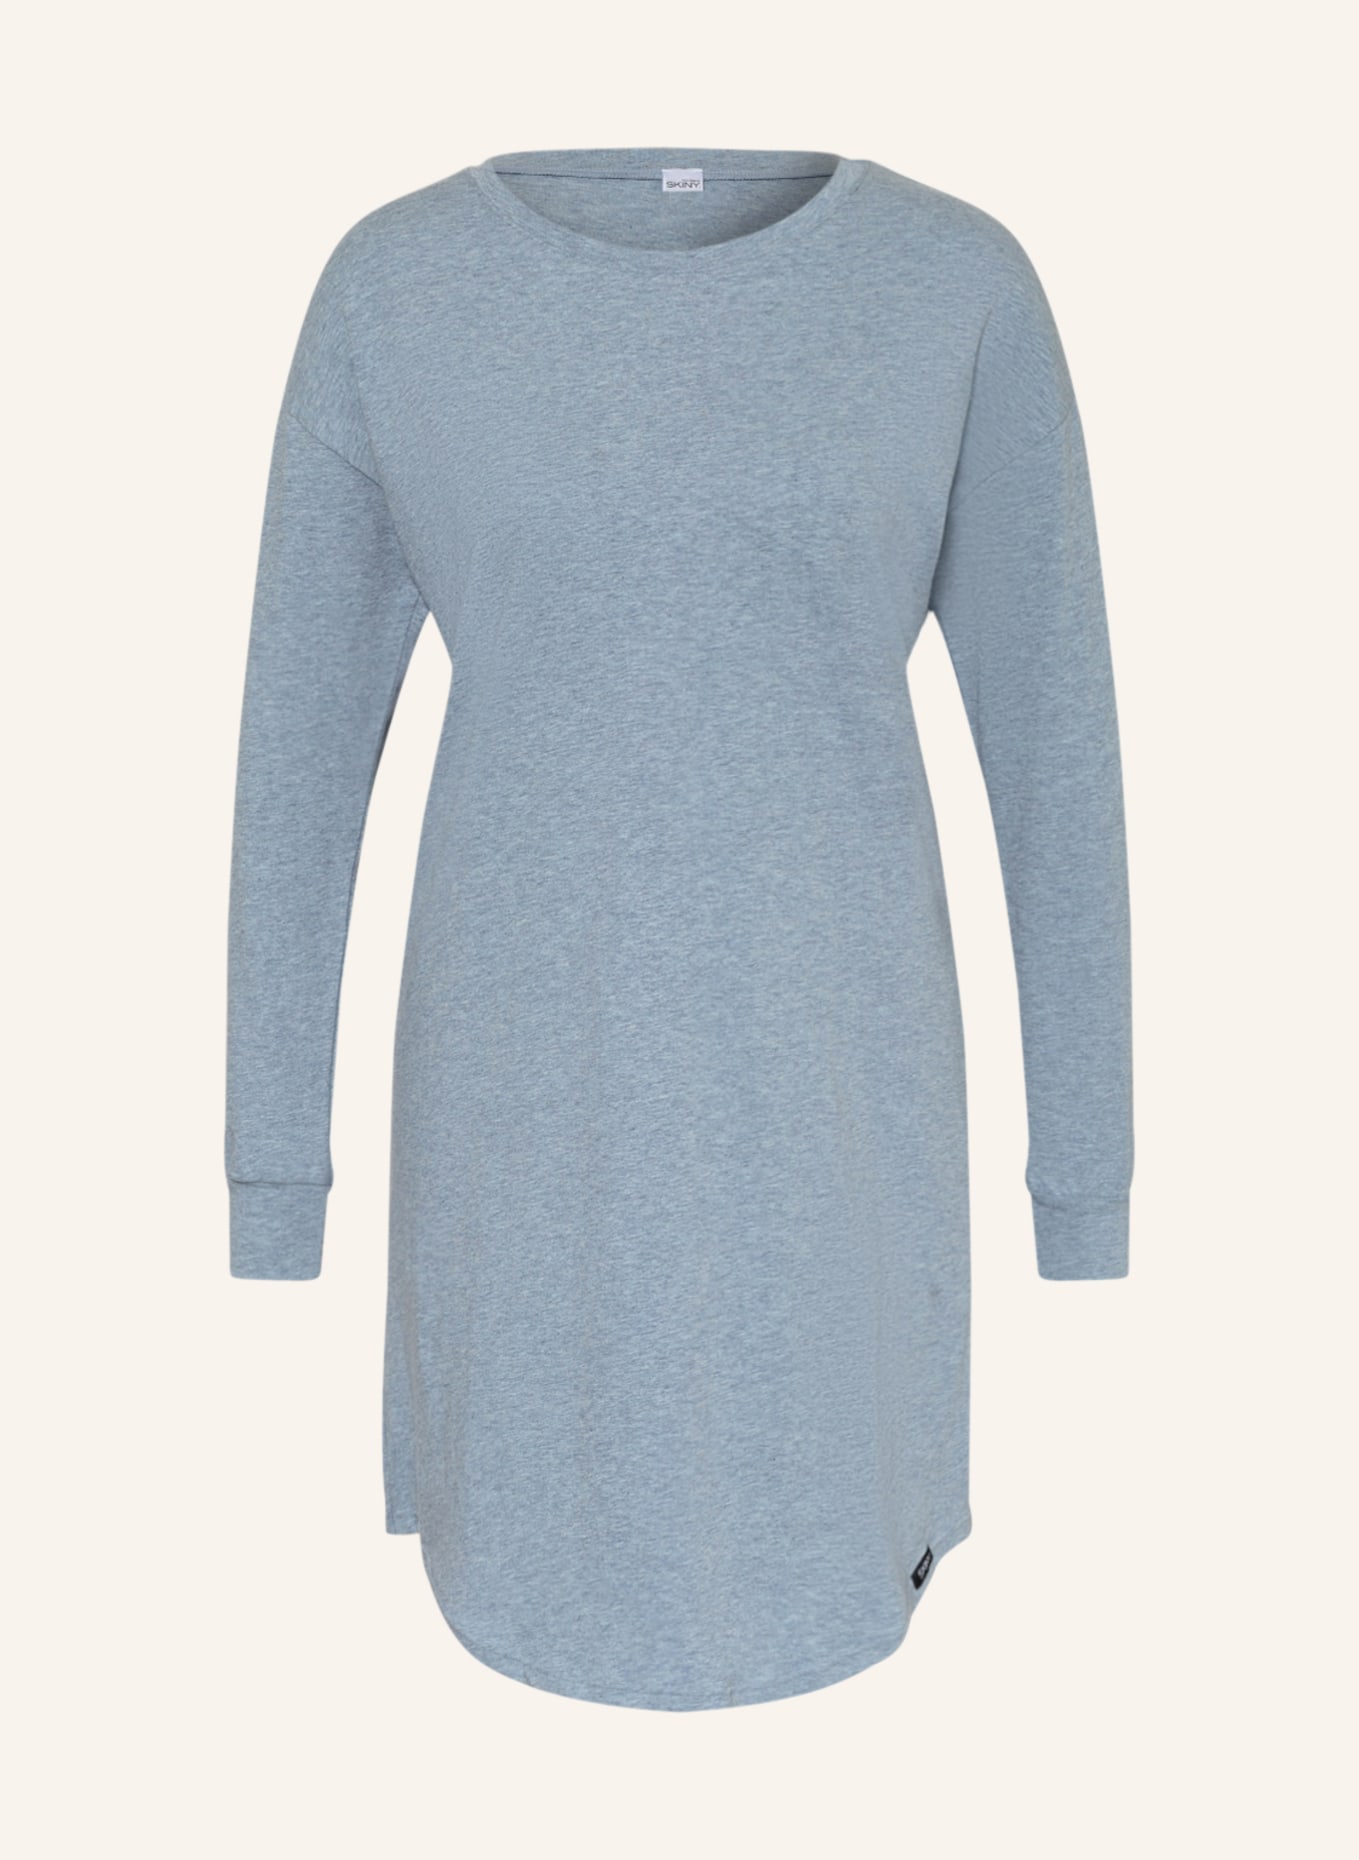 Skiny Nightgown EVERY NIGHT IN MIX & MATCH in blue gray